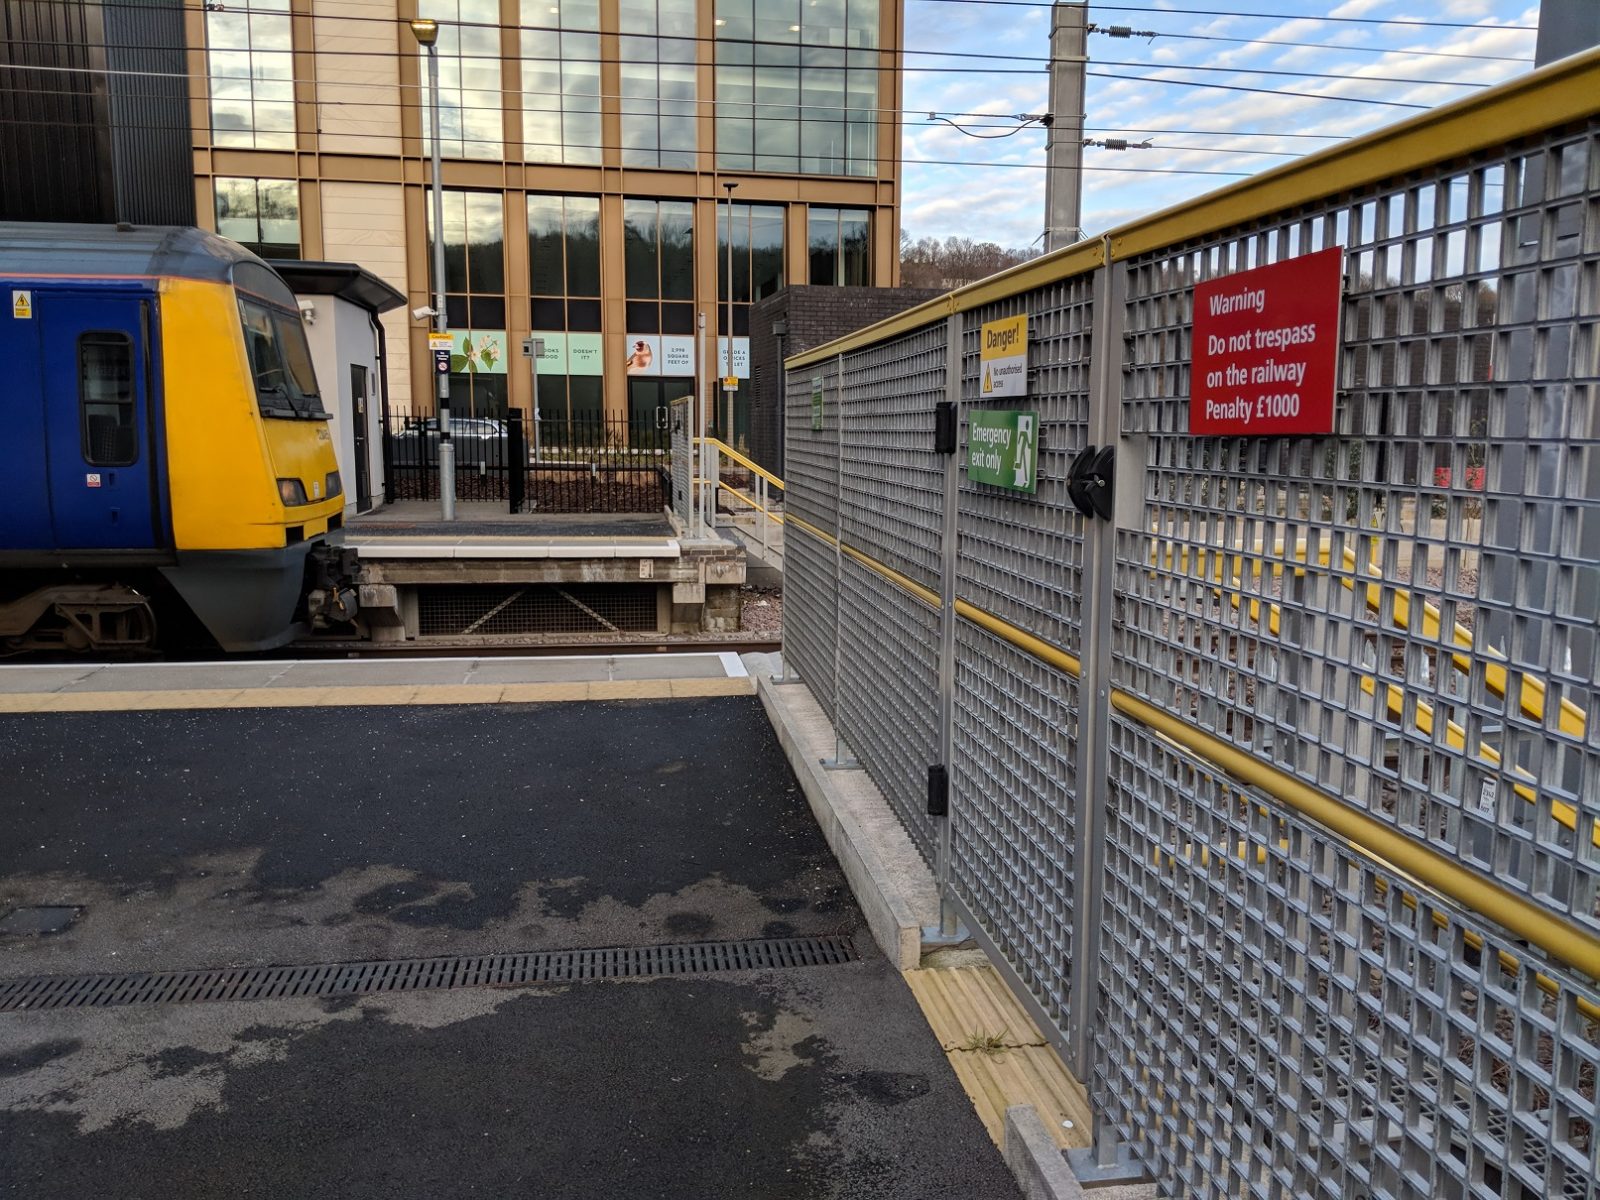 Grated Gate and Railway Fence at a Train Station